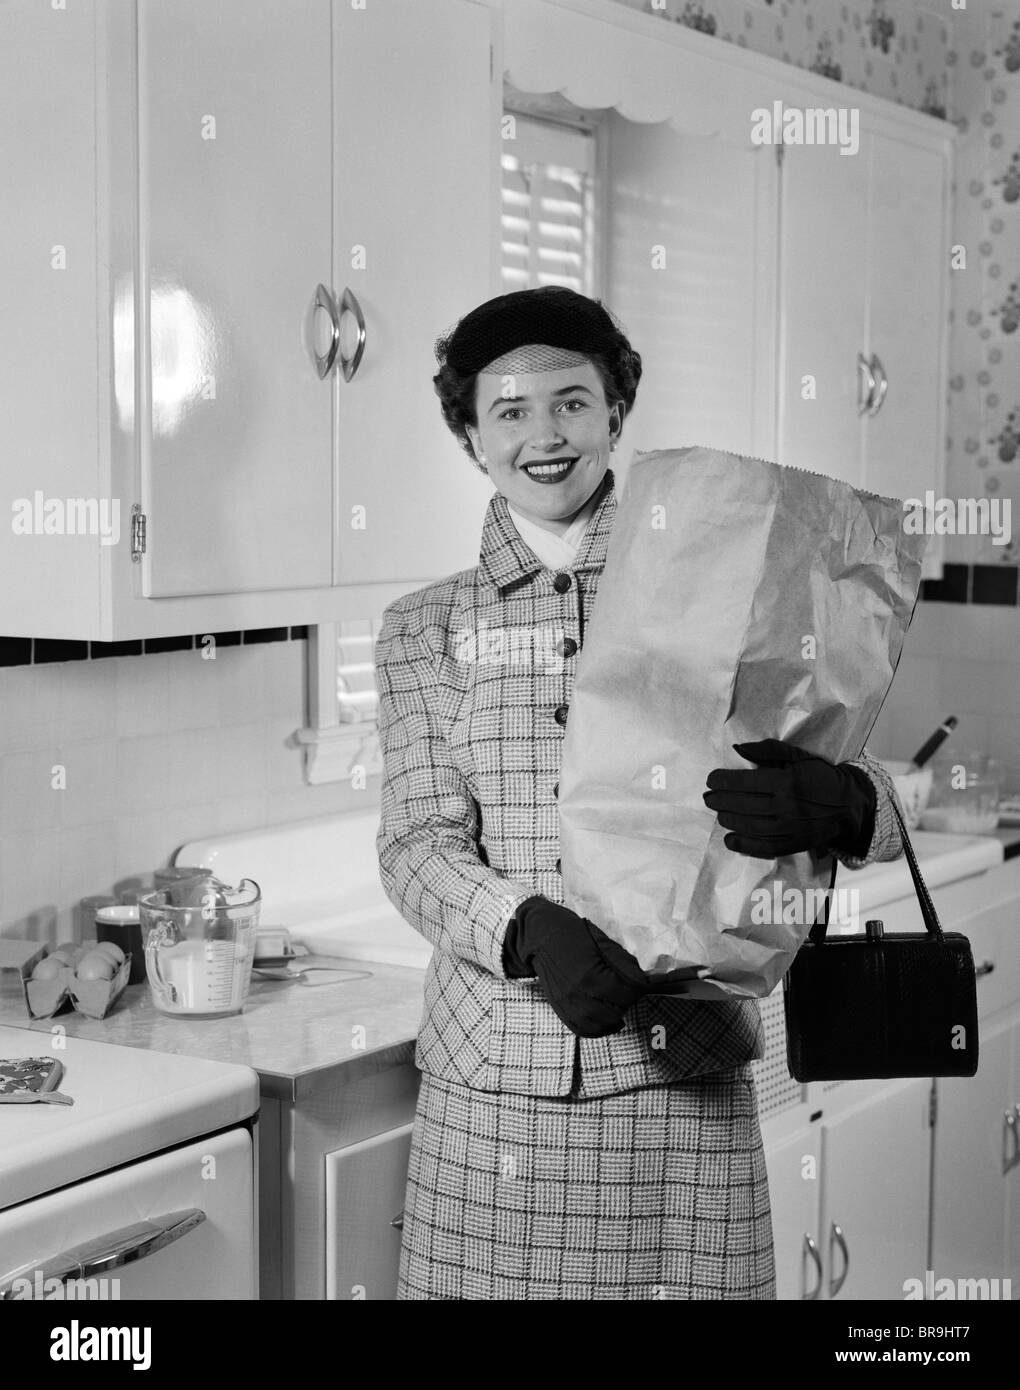 1950s SMILING WOMAN IN KITCHEN HOLDING GROCERY BAG HANDBAG WEARING HAT GLOVES LOOKING AT CAMERA Stock Photo